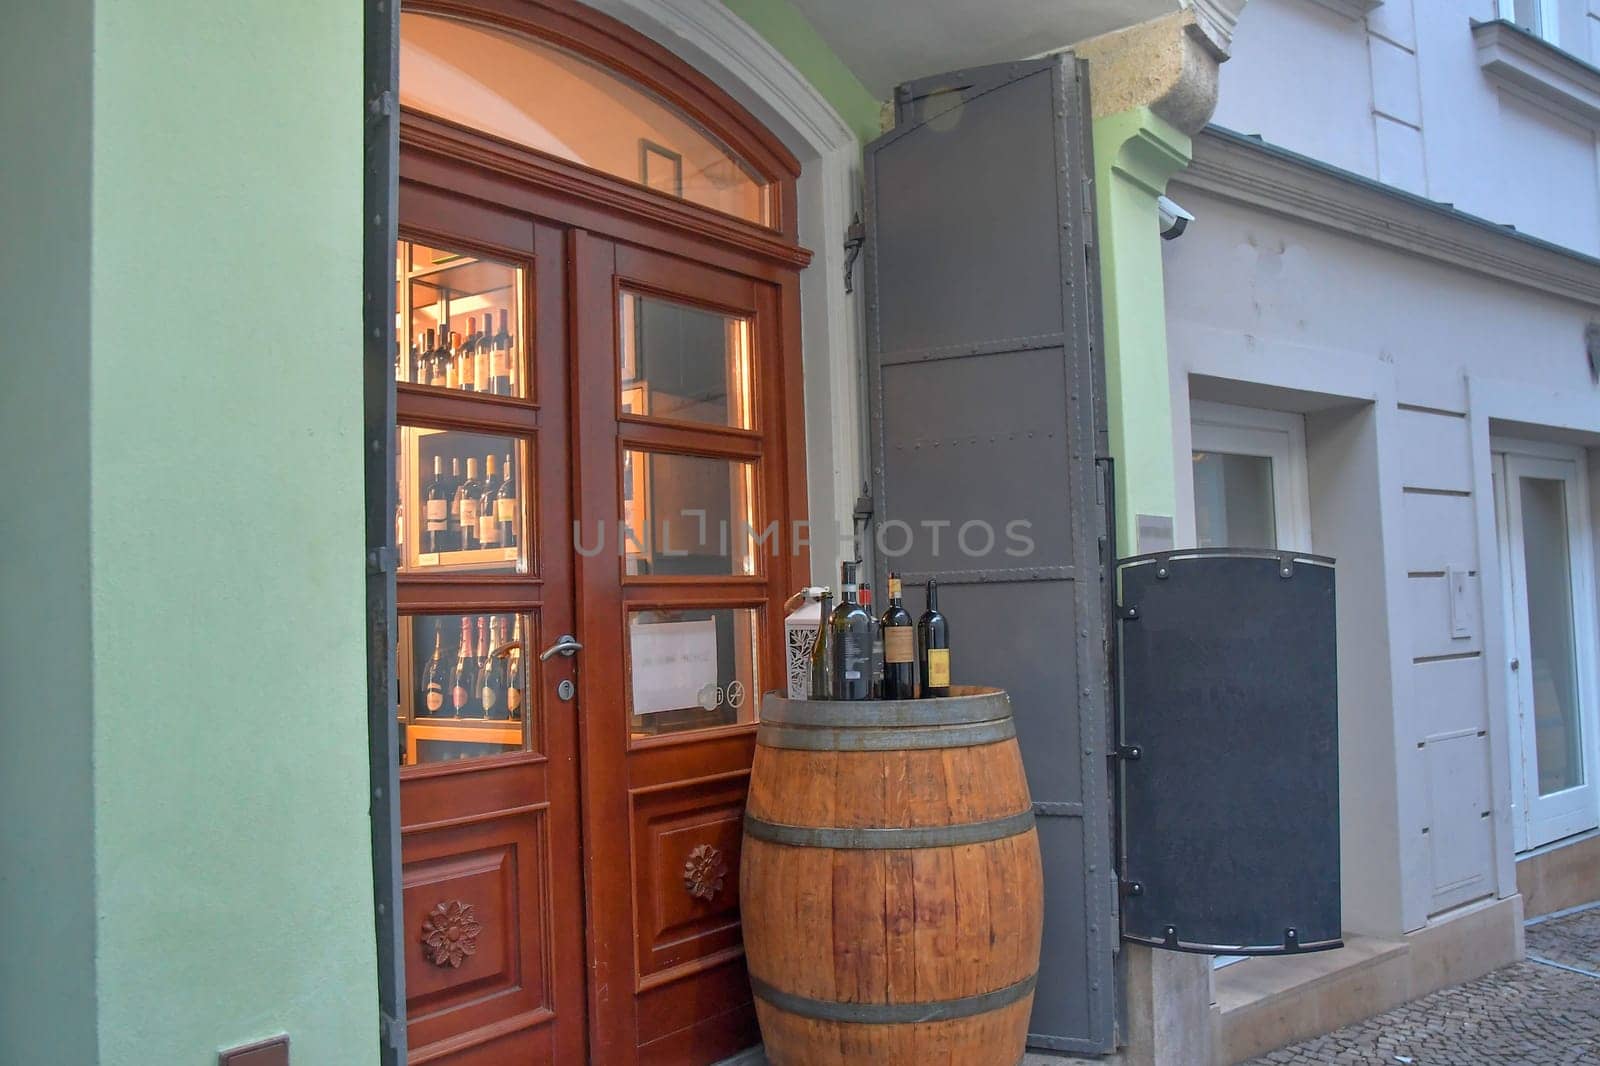 Vine shop. Outside view at Vine shop. Outside view at vinotheque by roman_nerud